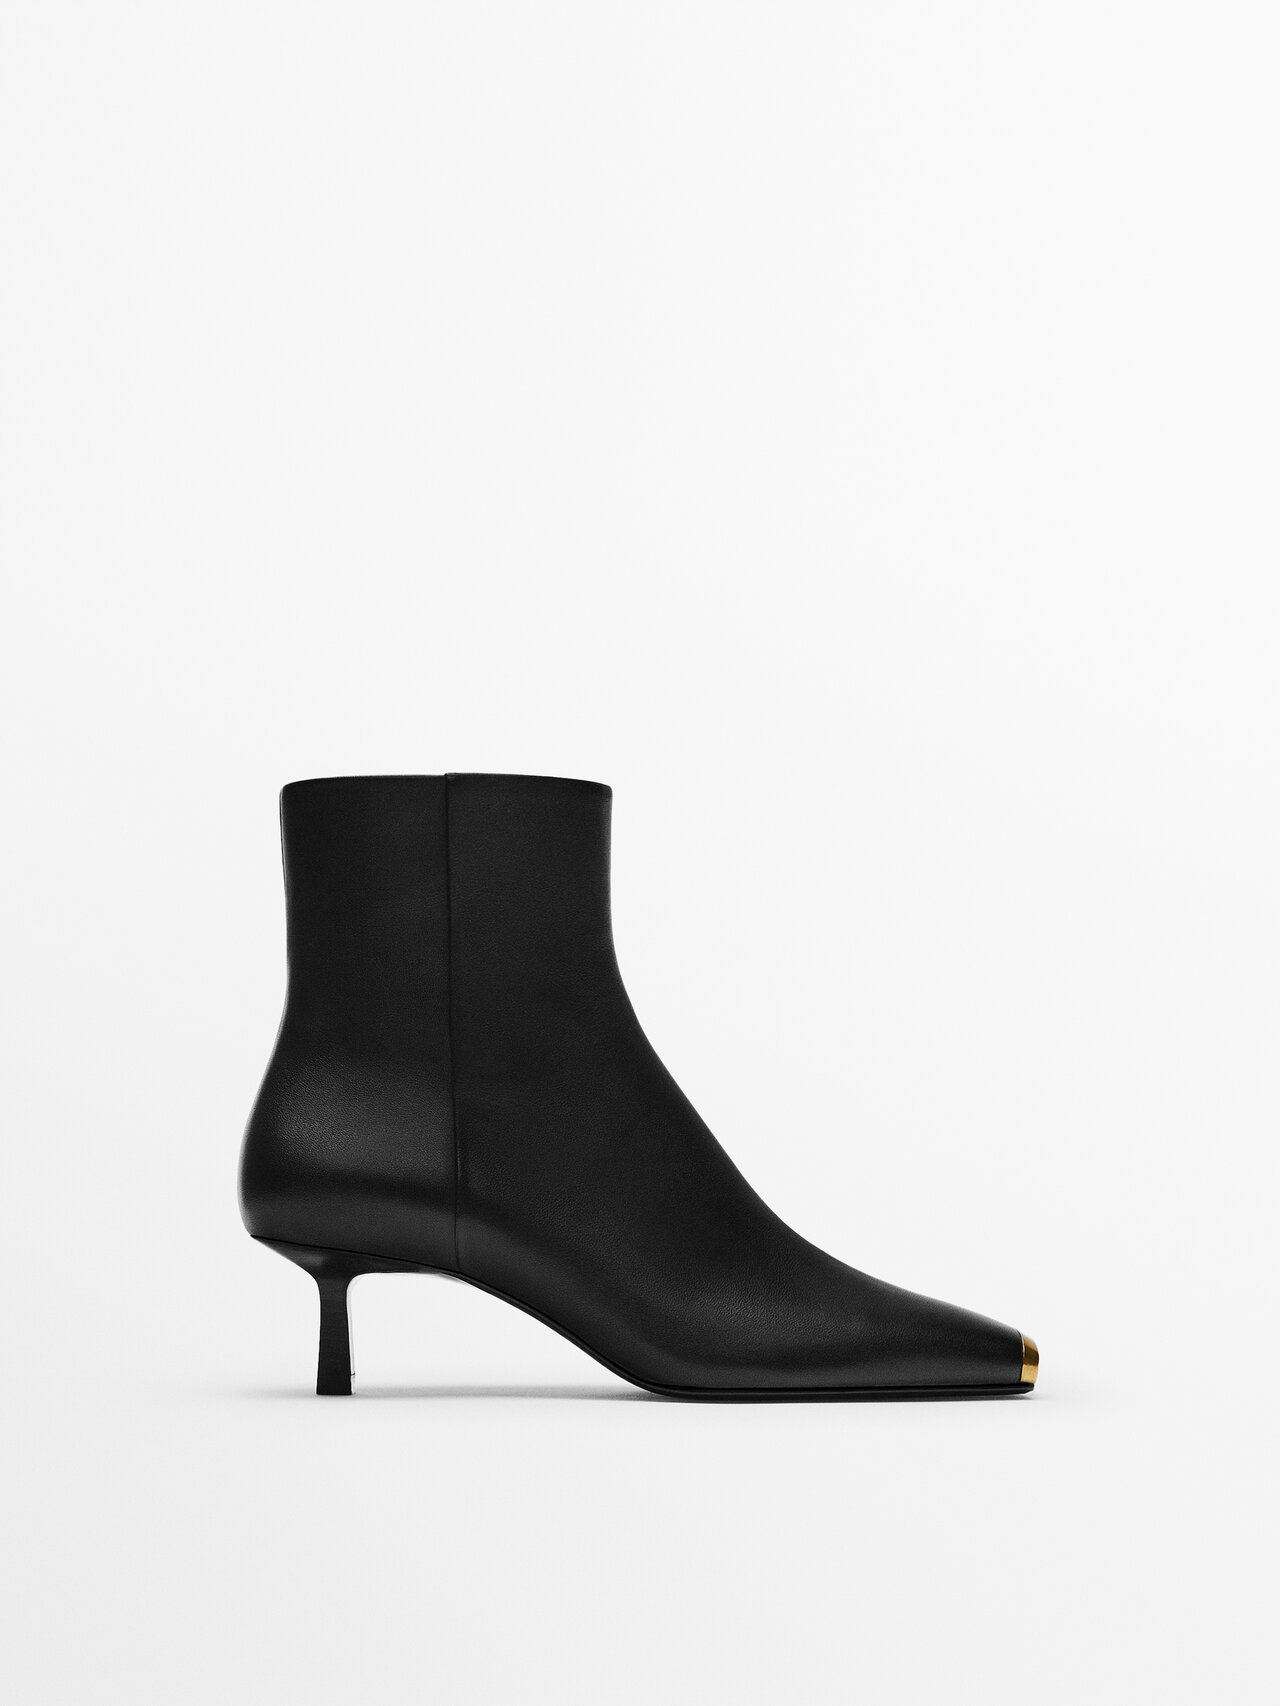 Massimo Dutti Leather Ankle Boots With Metal Toe In Black